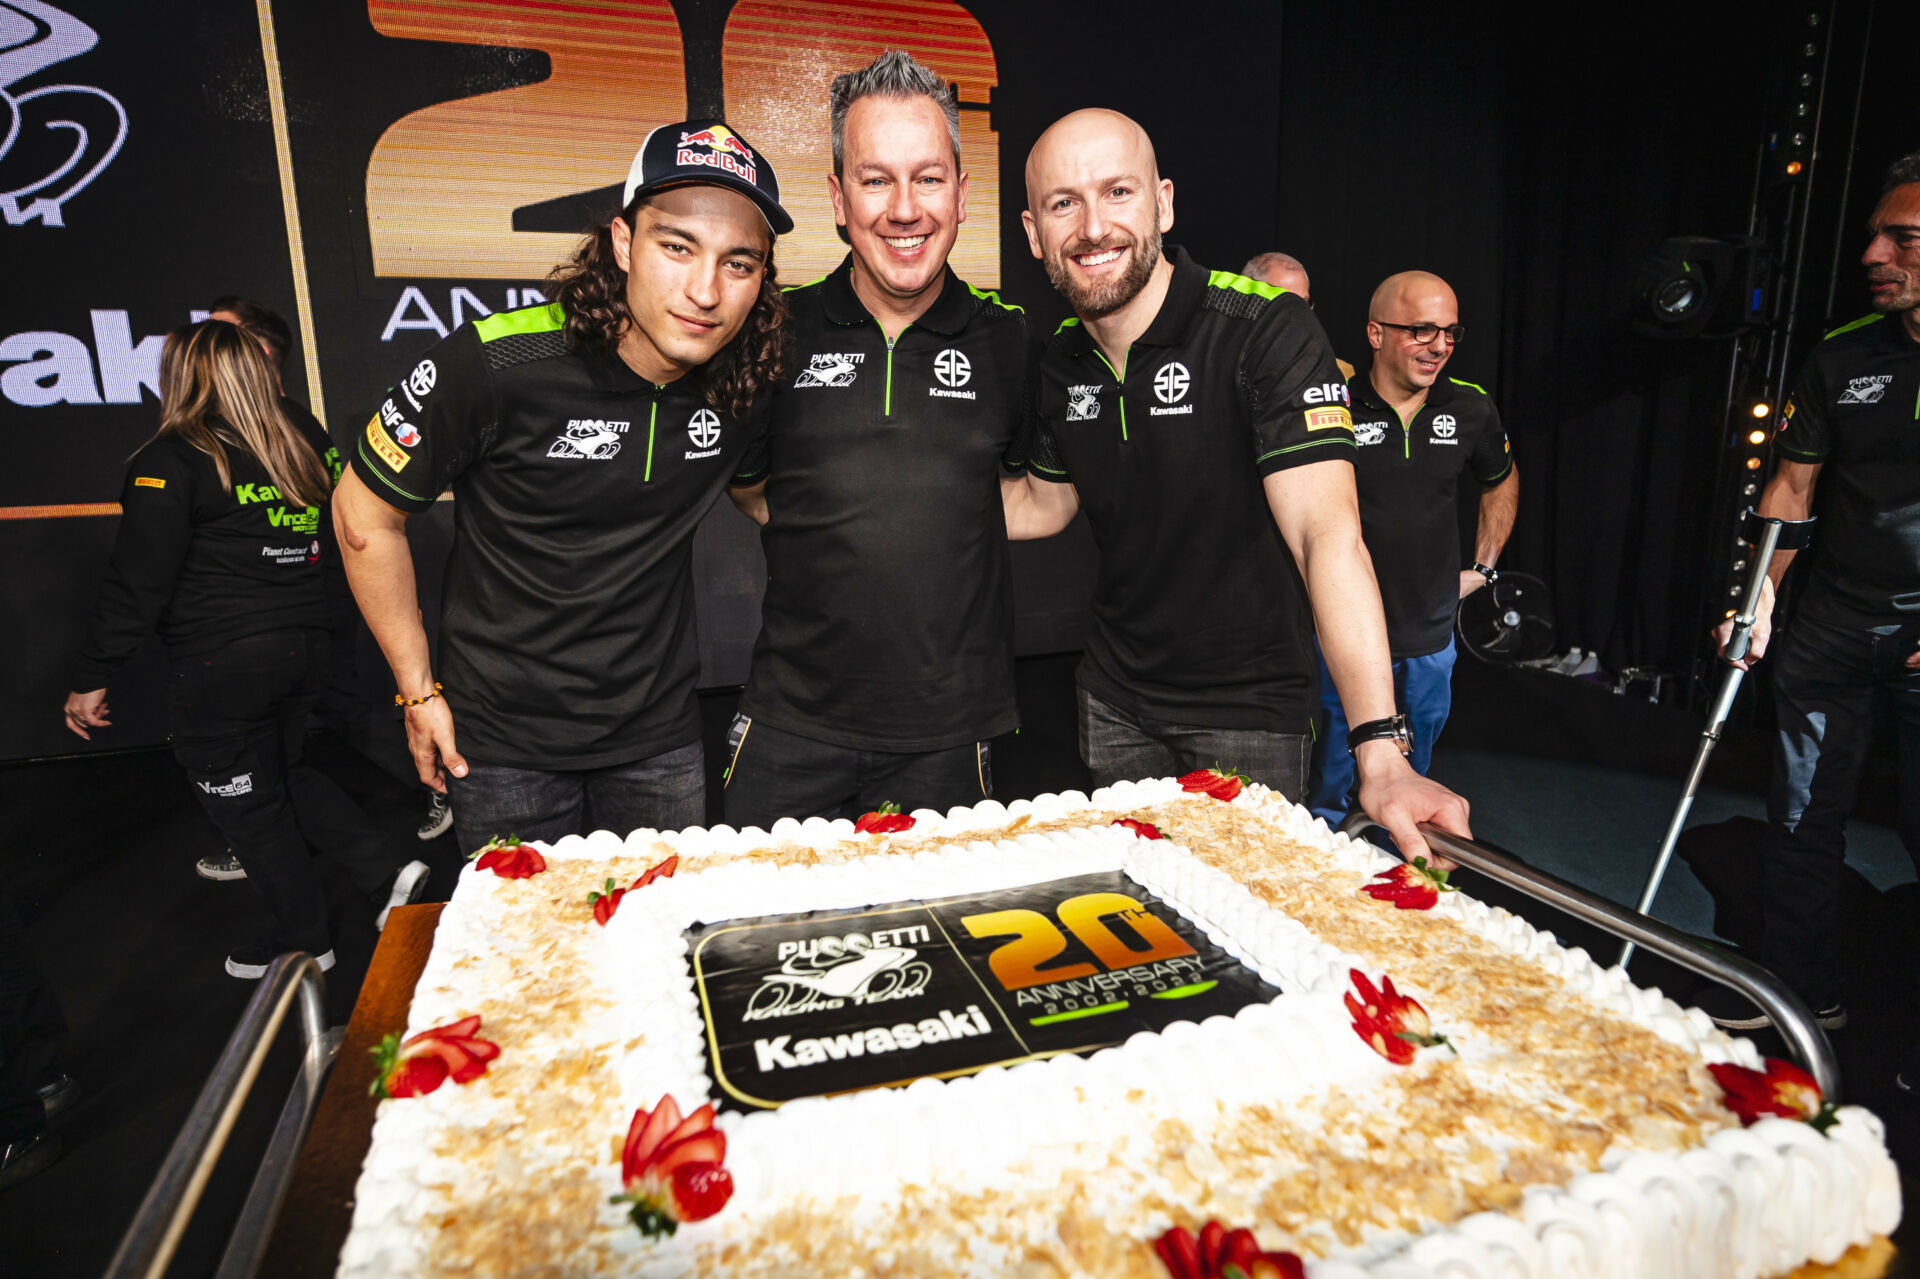 Puccetti Kawasaki Racing Team Manager Manuel Puccetti (center) with riders Tom Sykes (right) and Can Oncu (left). Photo courtesy Kawasaki.